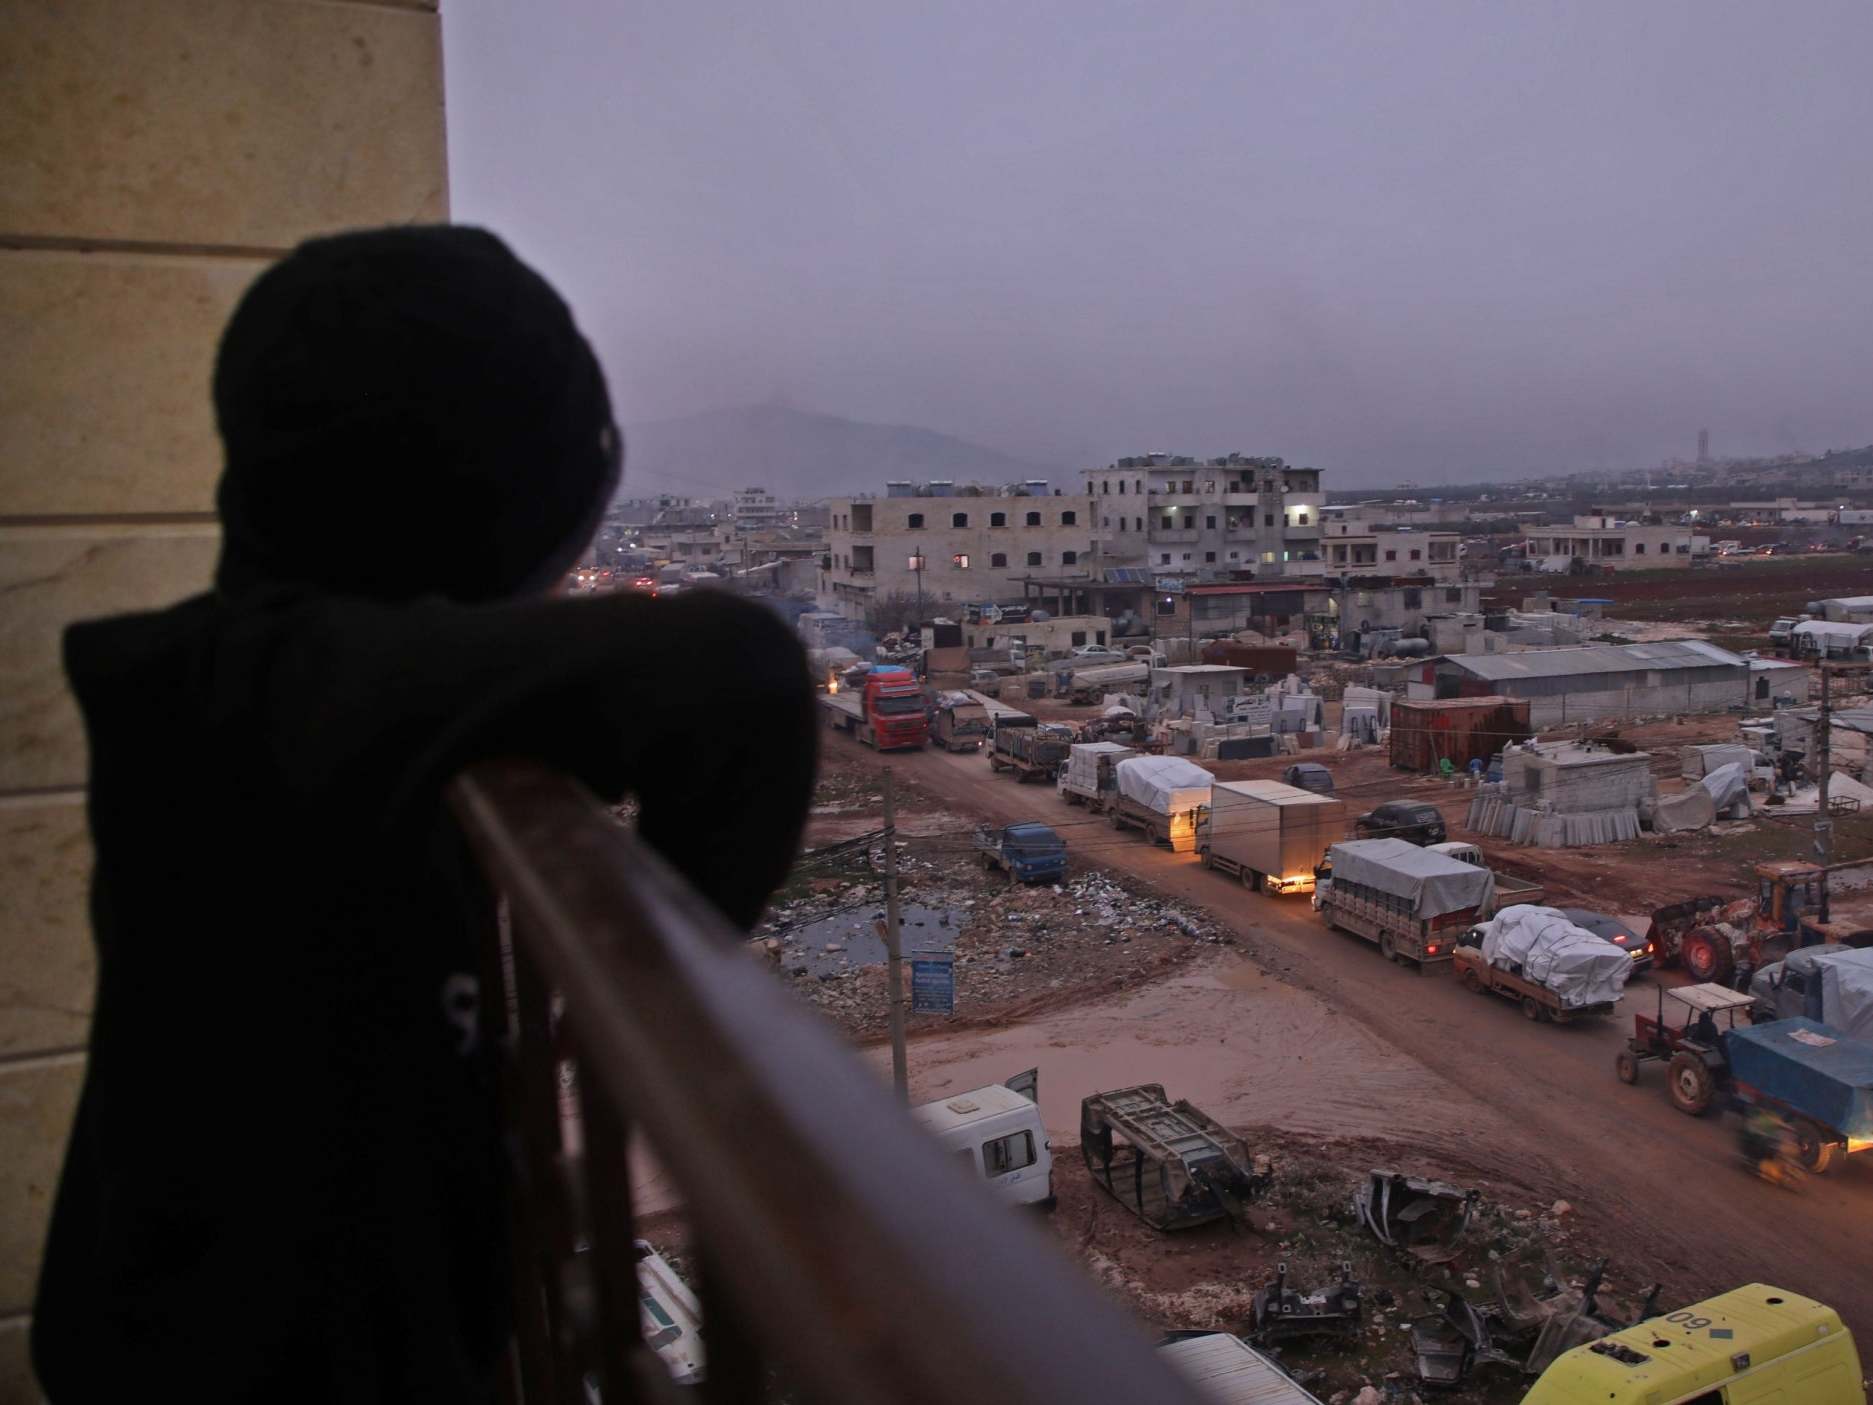 A child in the Syrian town of Dana, east of the Turkish-Syrian border in the northwestern Syrian Idlib province, watches from a balcony as a large convoy of displaced people who fled pro-regime attacks on rebel-held areas of the same province seek shelter in safer parts, on February 11, 2020.